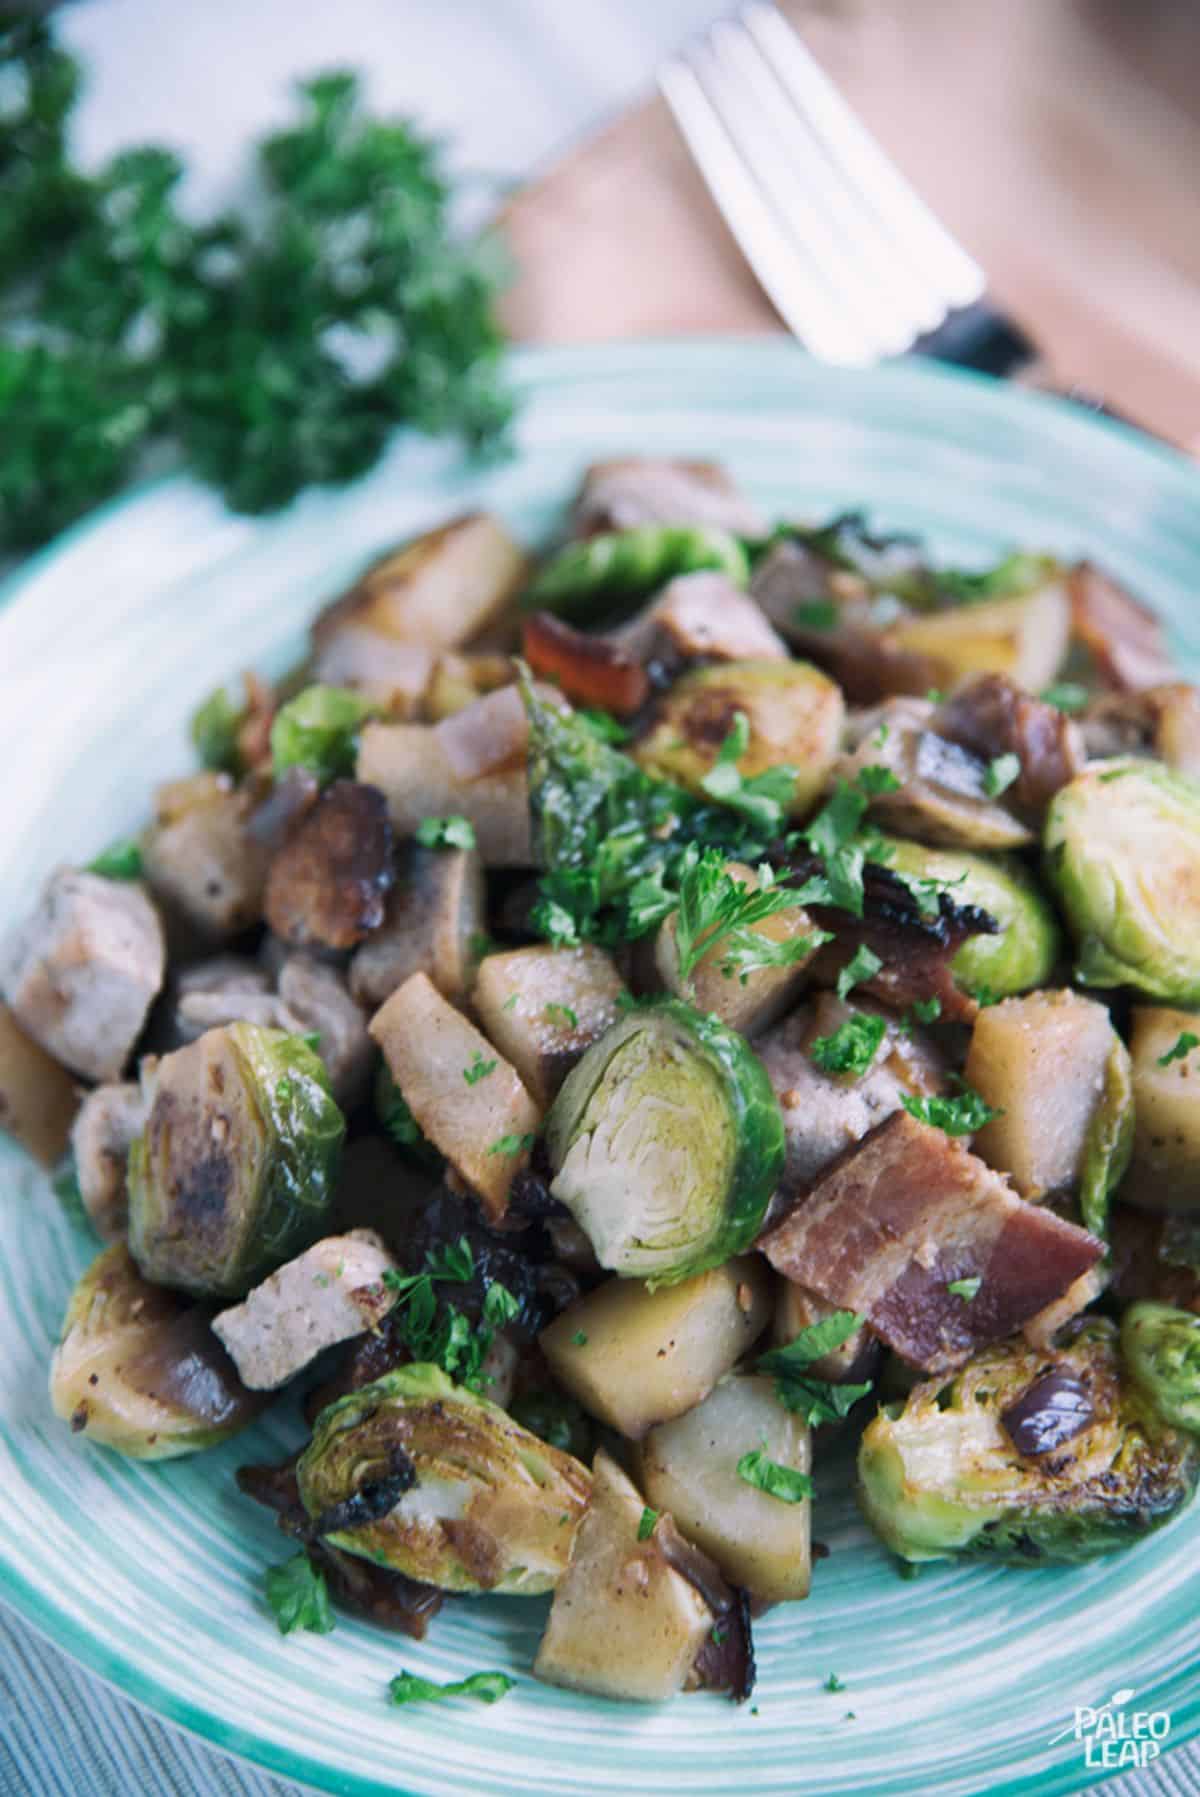 Pork with Sauteed Apples and Brussels Sprouts